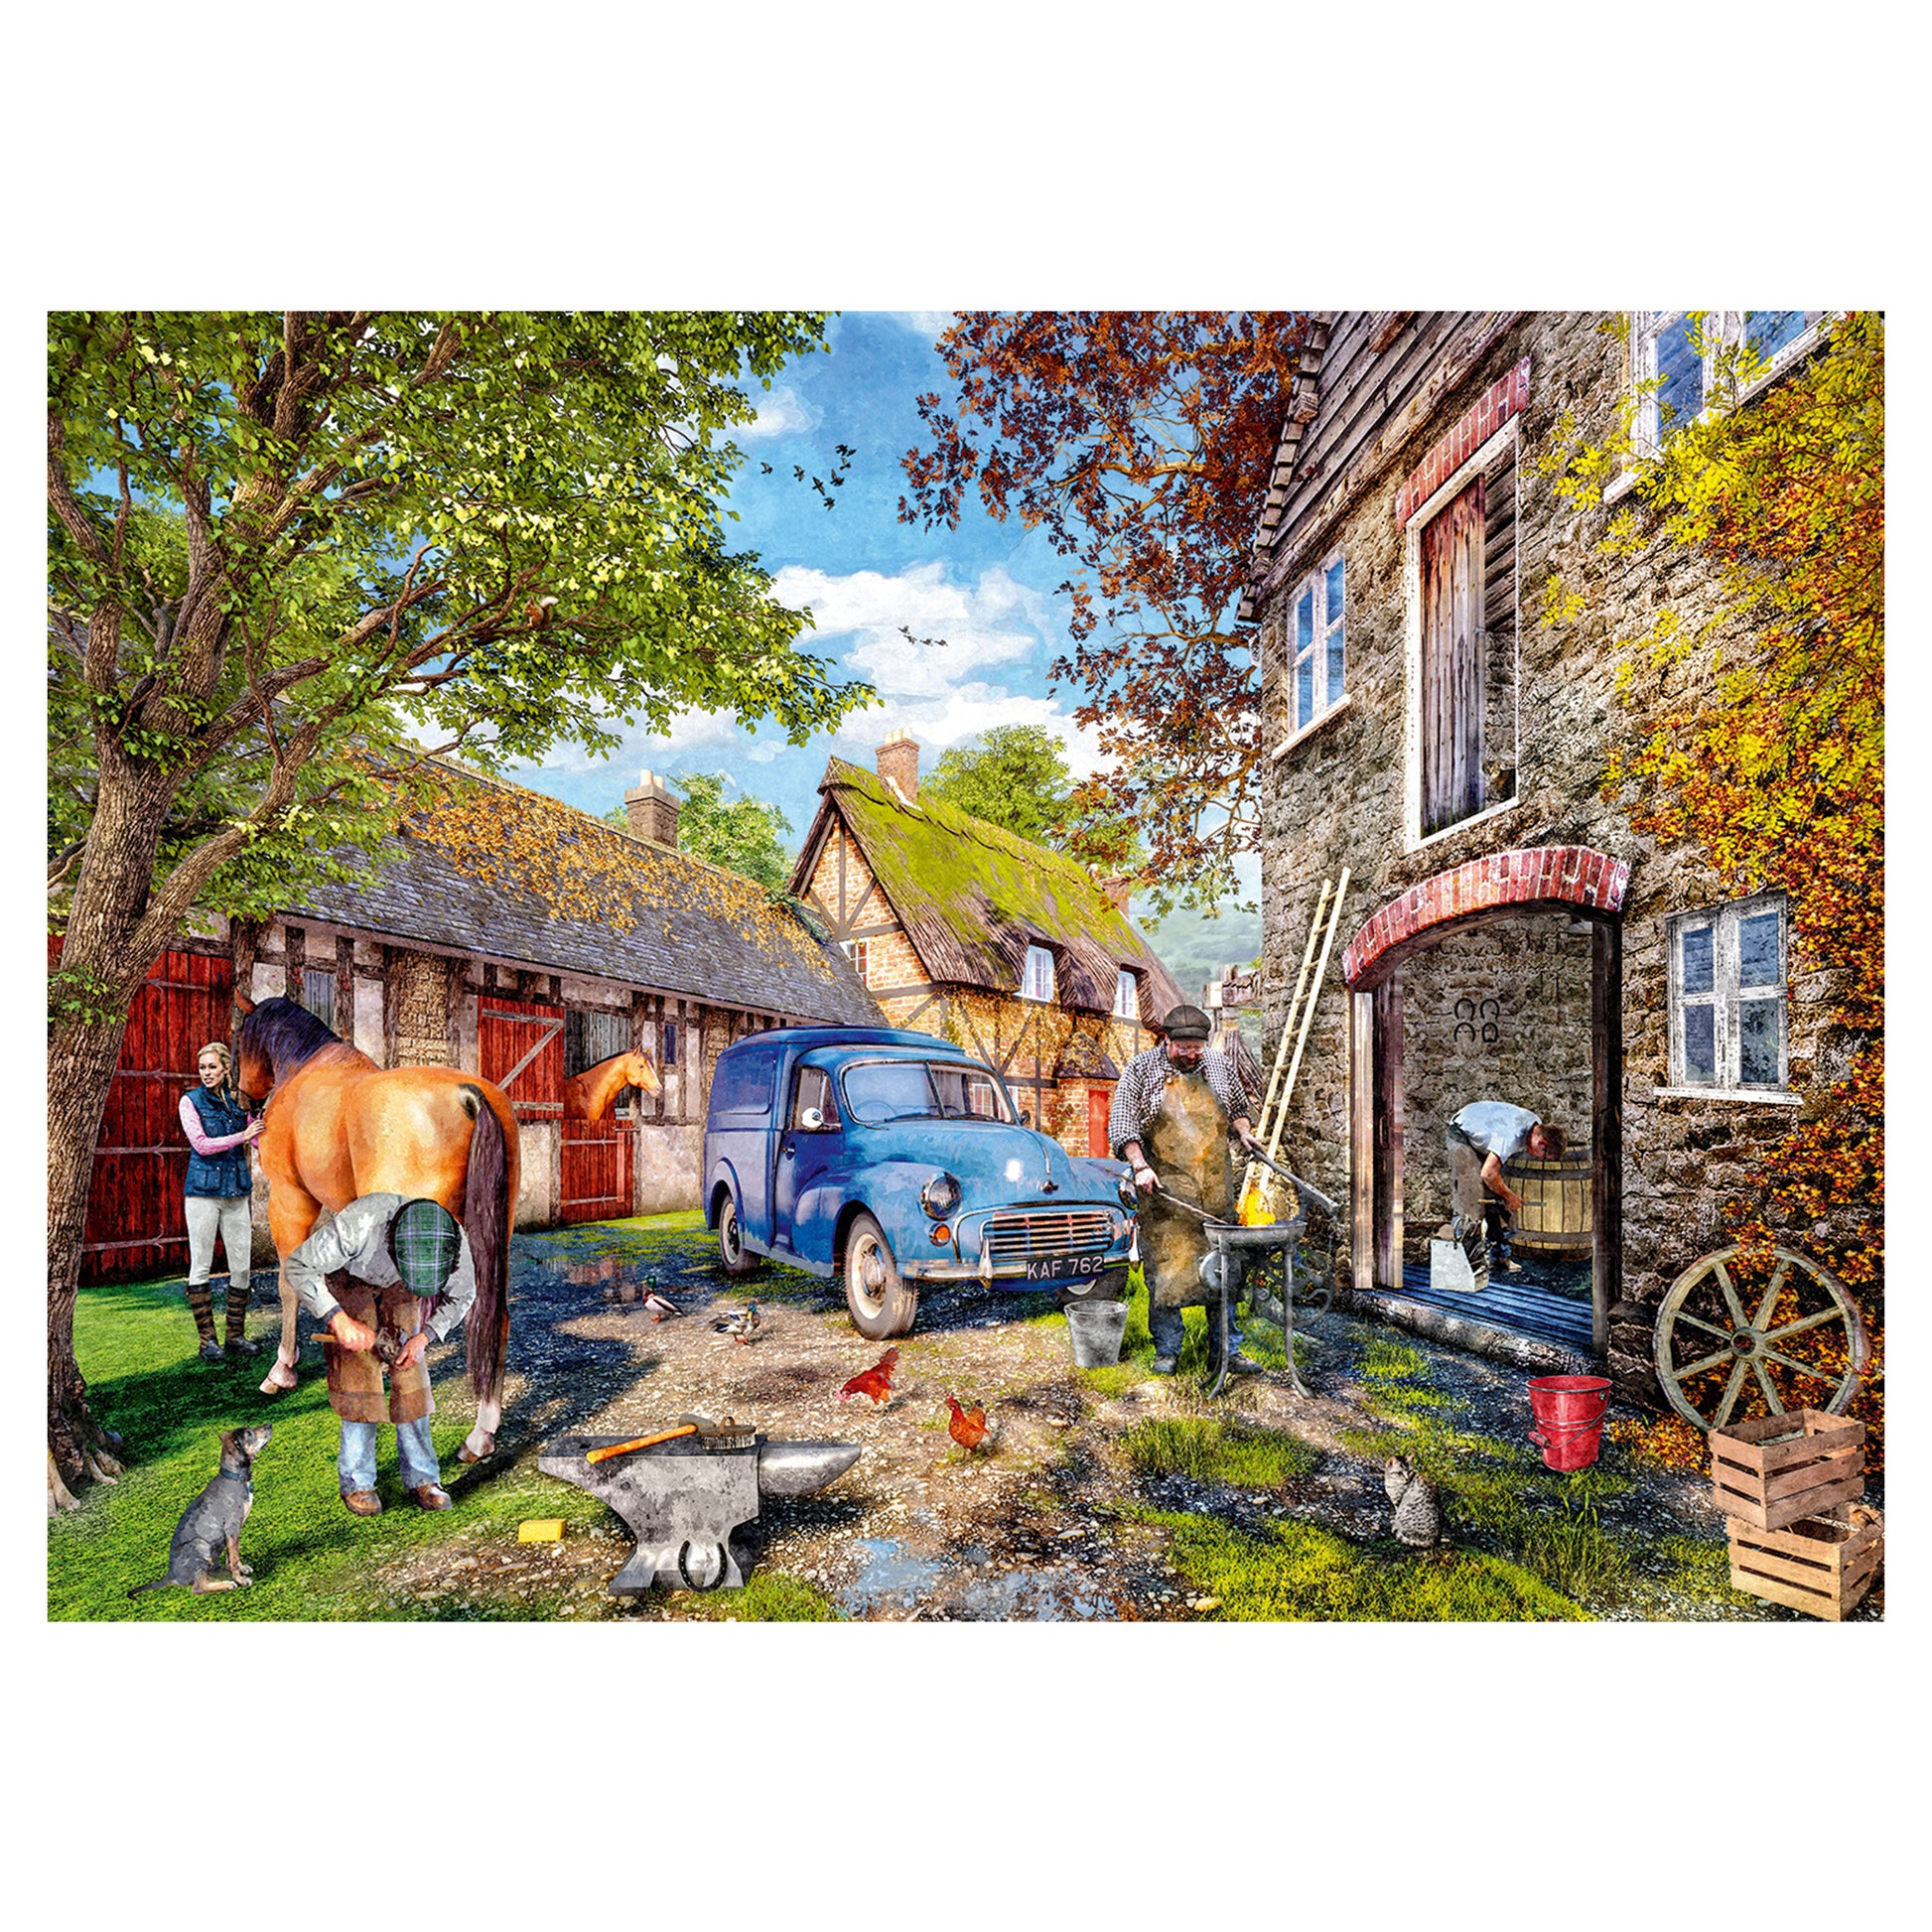 Falcon - The Blacksmith's Cottage (1000 pieces) - product image - Jumboplay.com